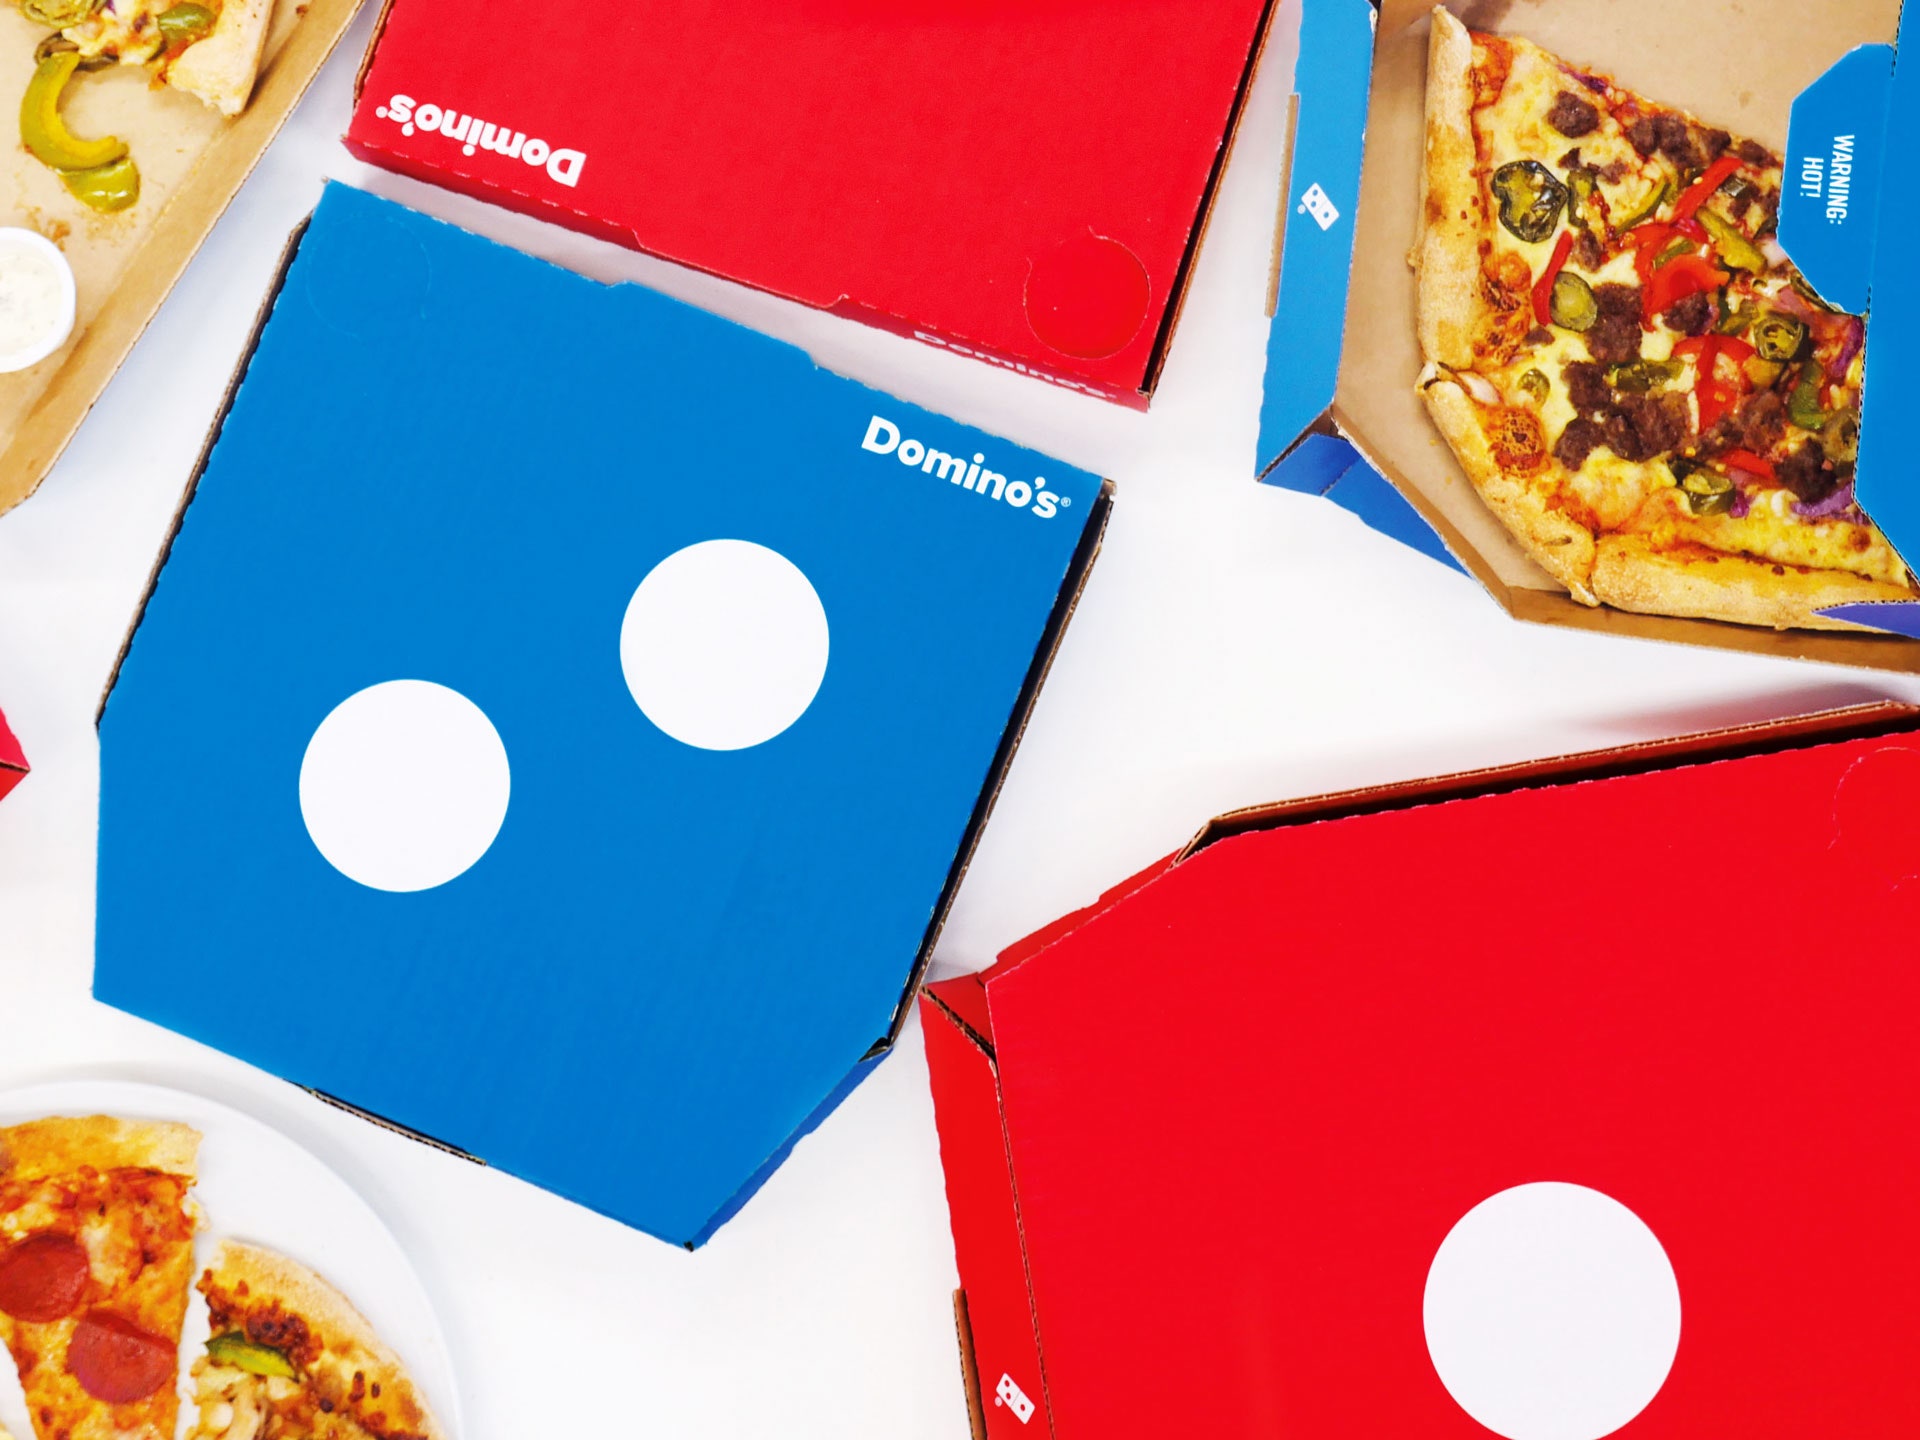 Dominos New Pizza Delivery Boxes Are Weirdly Clever WIRED 1920x1440